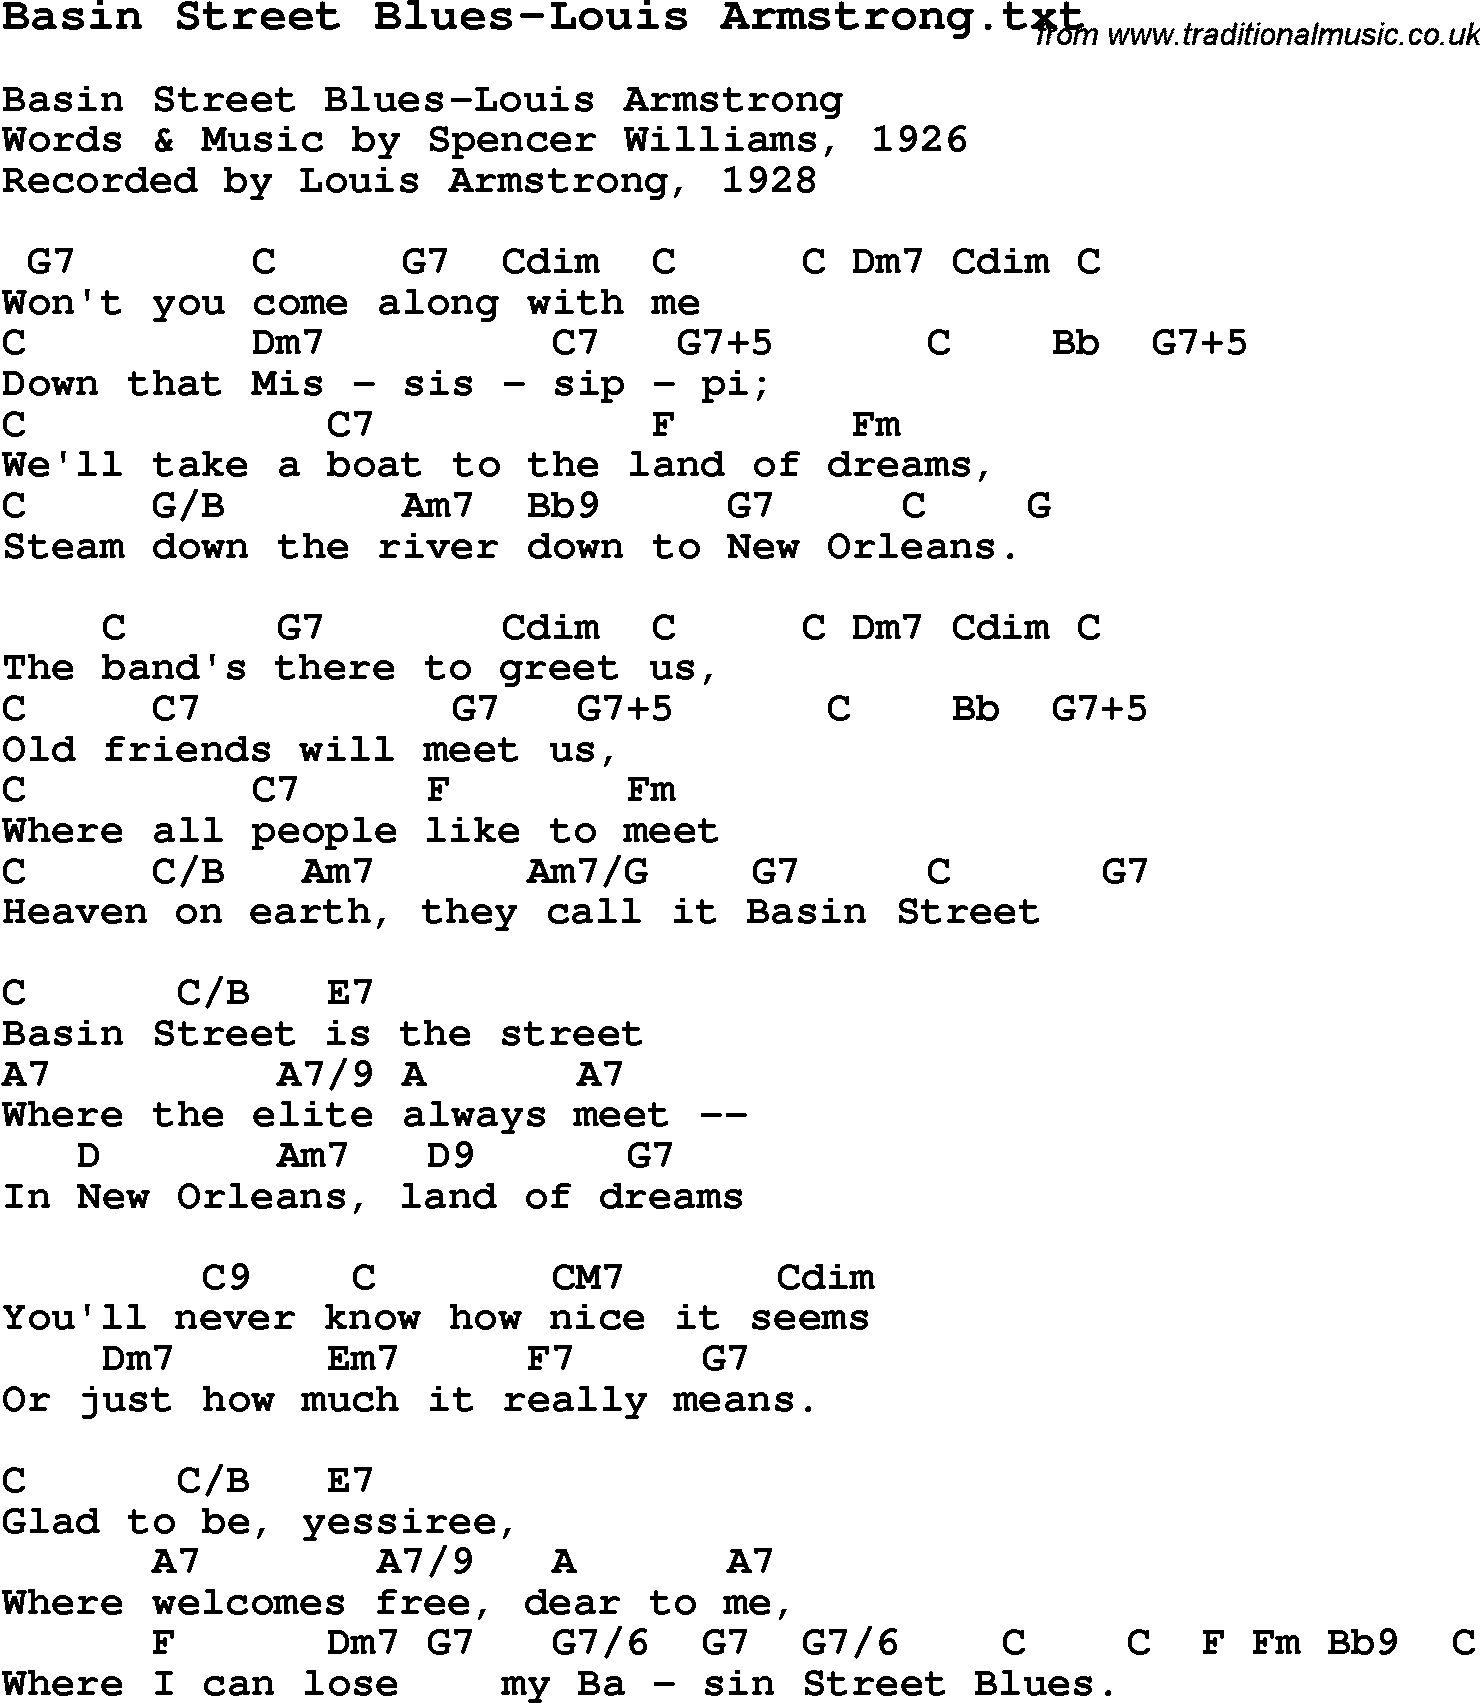 Jazz Song - Basin Street Blues-Louis Armstrong with Chords, Tabs and Lyrics from top bands and ...